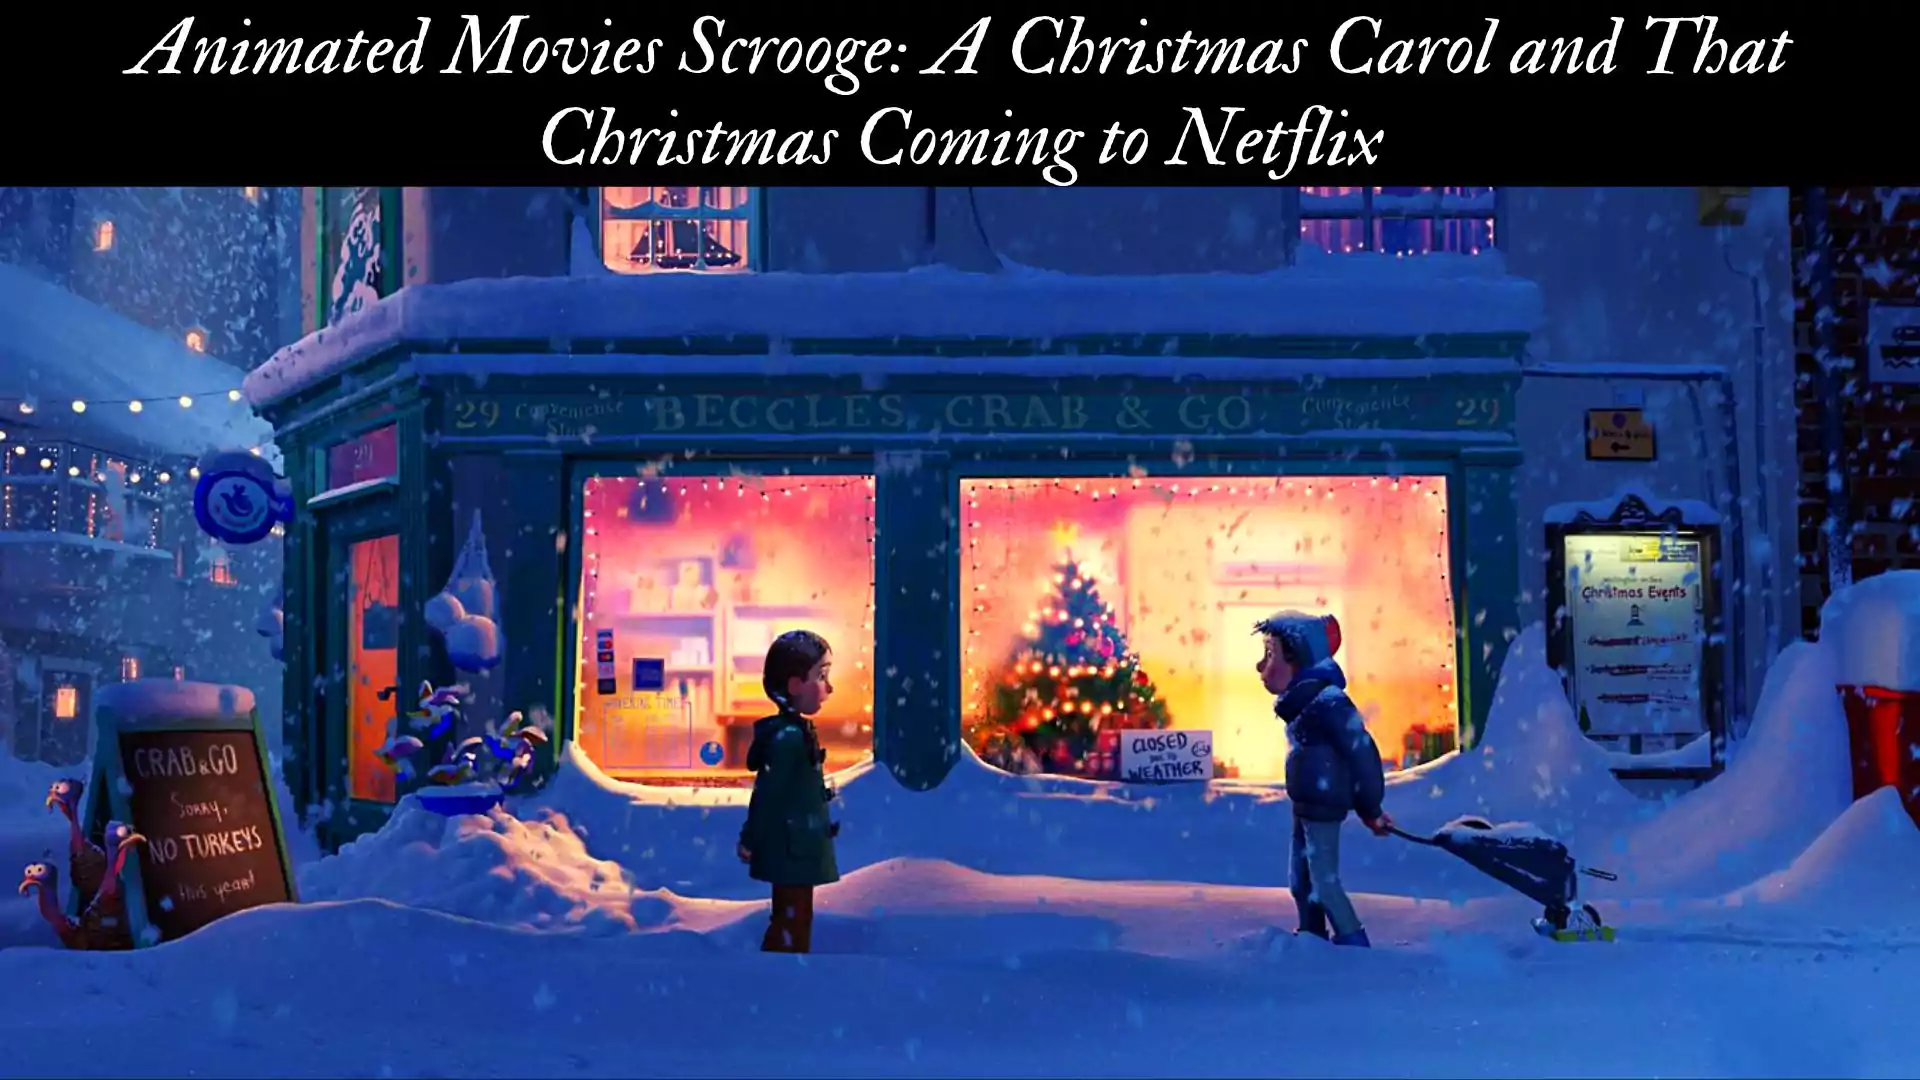 Animated Movies Scrooge: A Christmas Carol and That Christmas Coming to Netflix